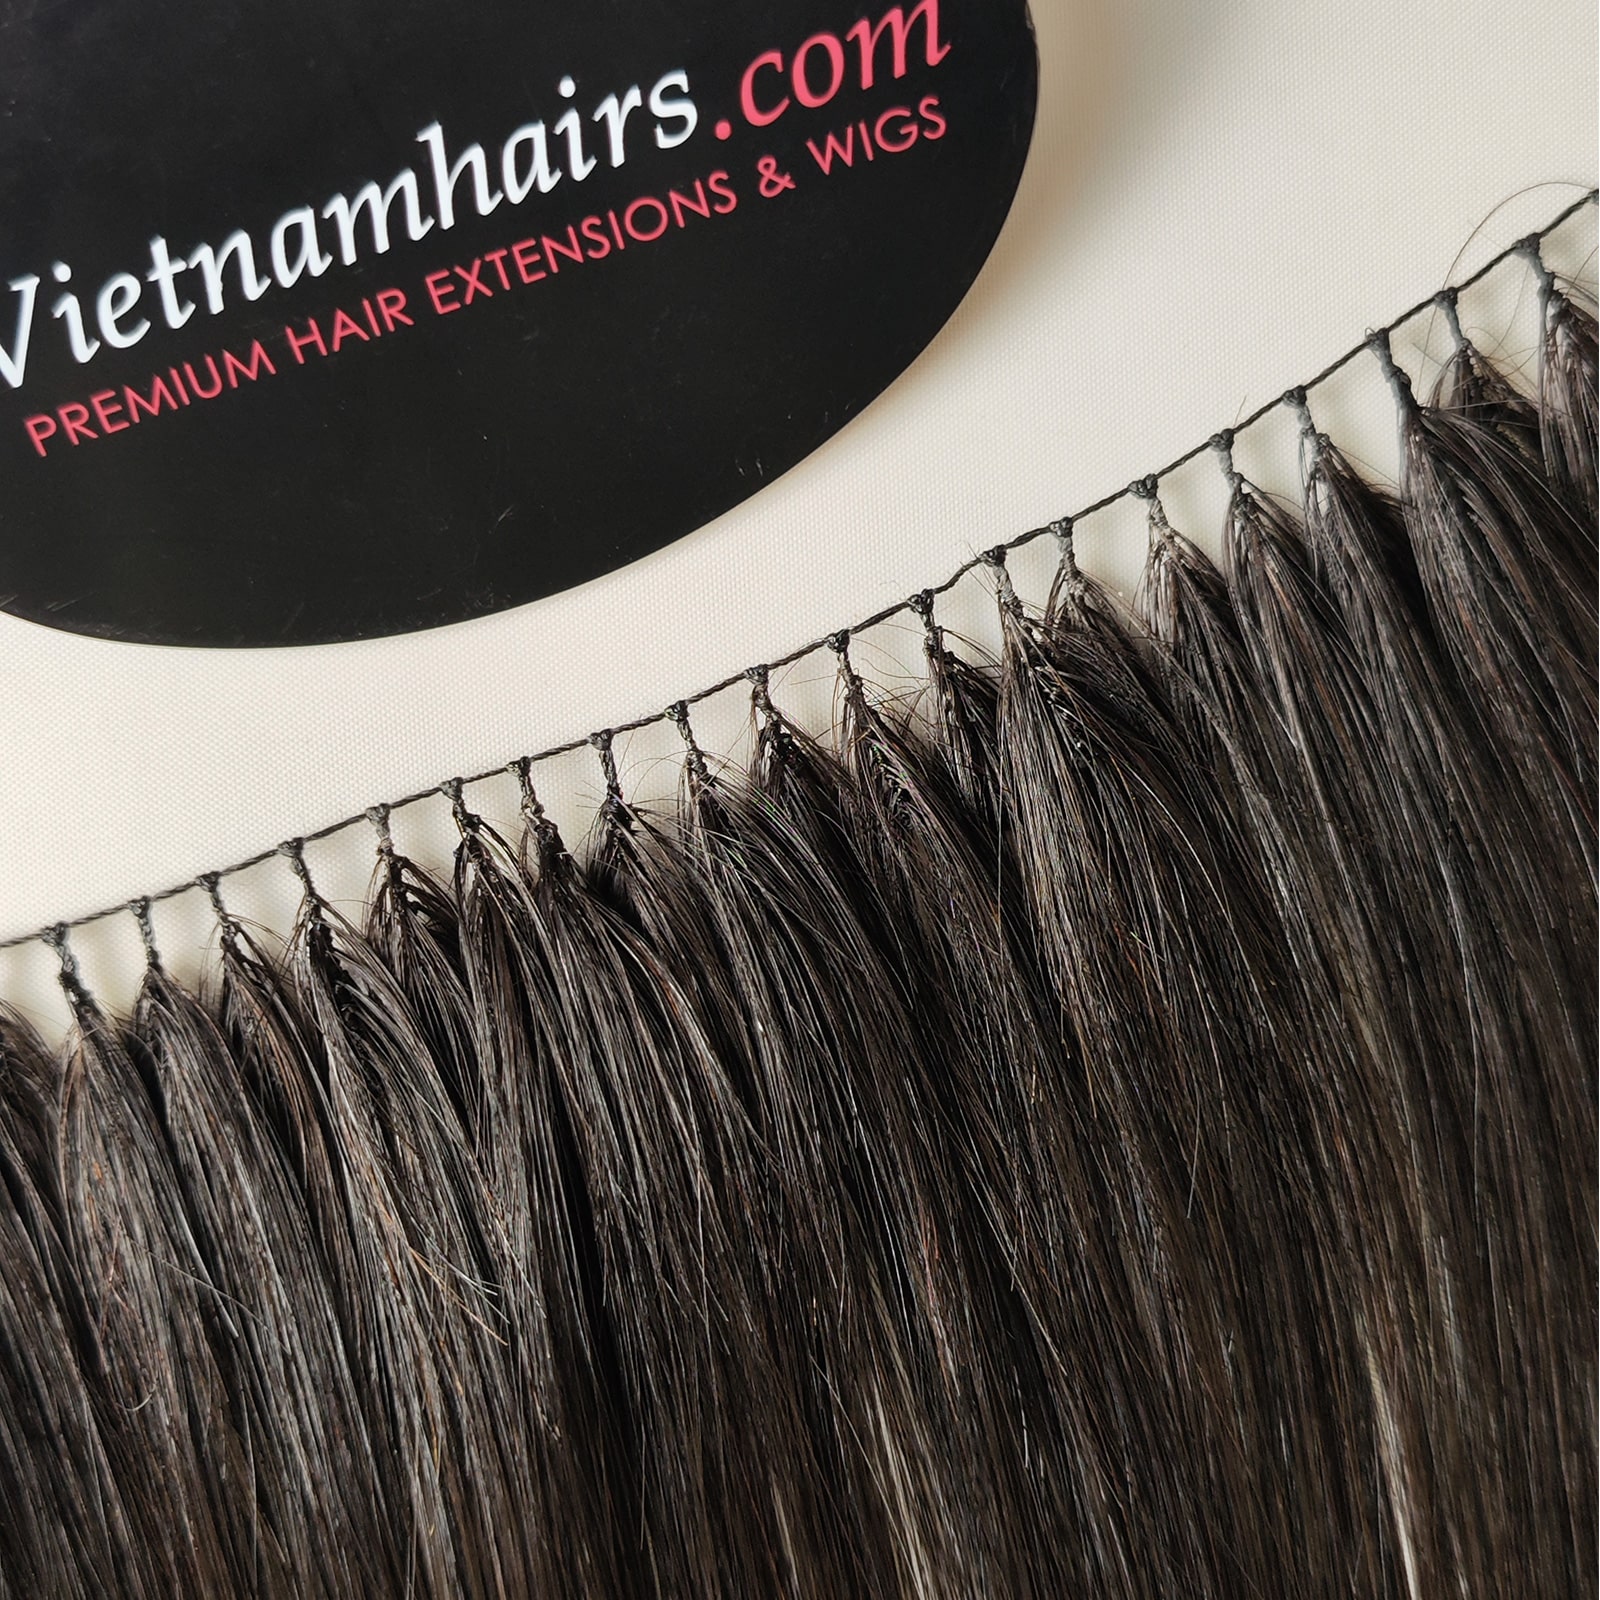 Feather Weft Hair   - Hair Extensions & Wigs Factory